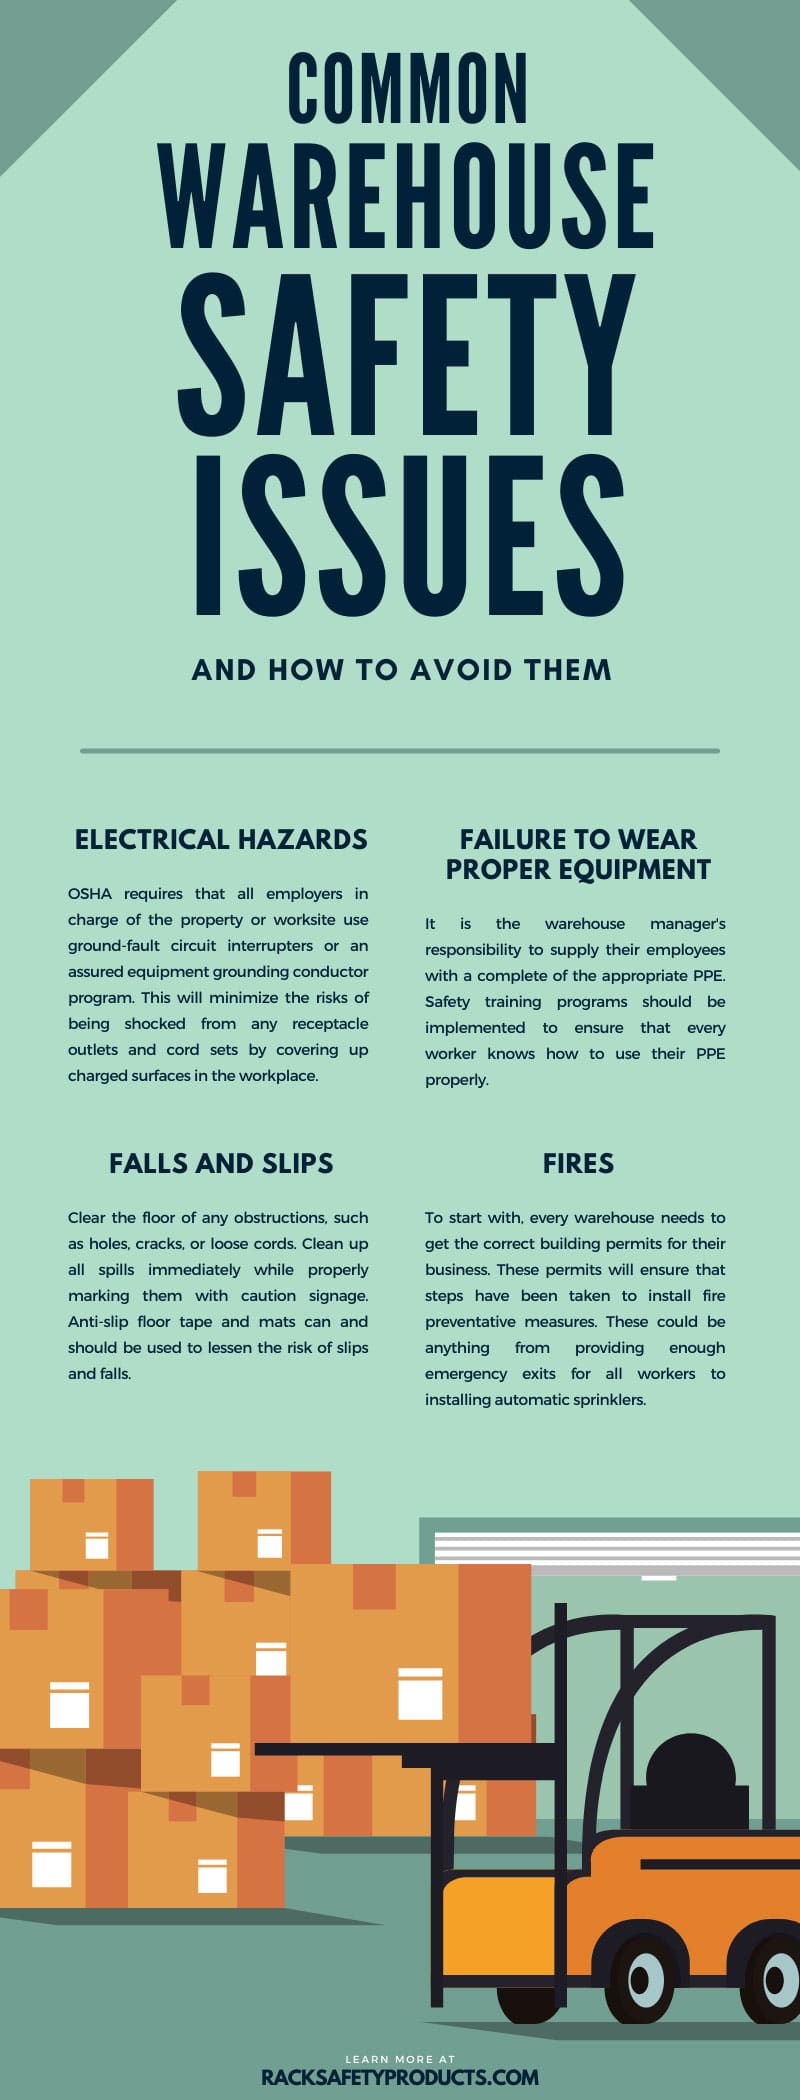 Common Warehouse Safety Issues and How To Avoid Them